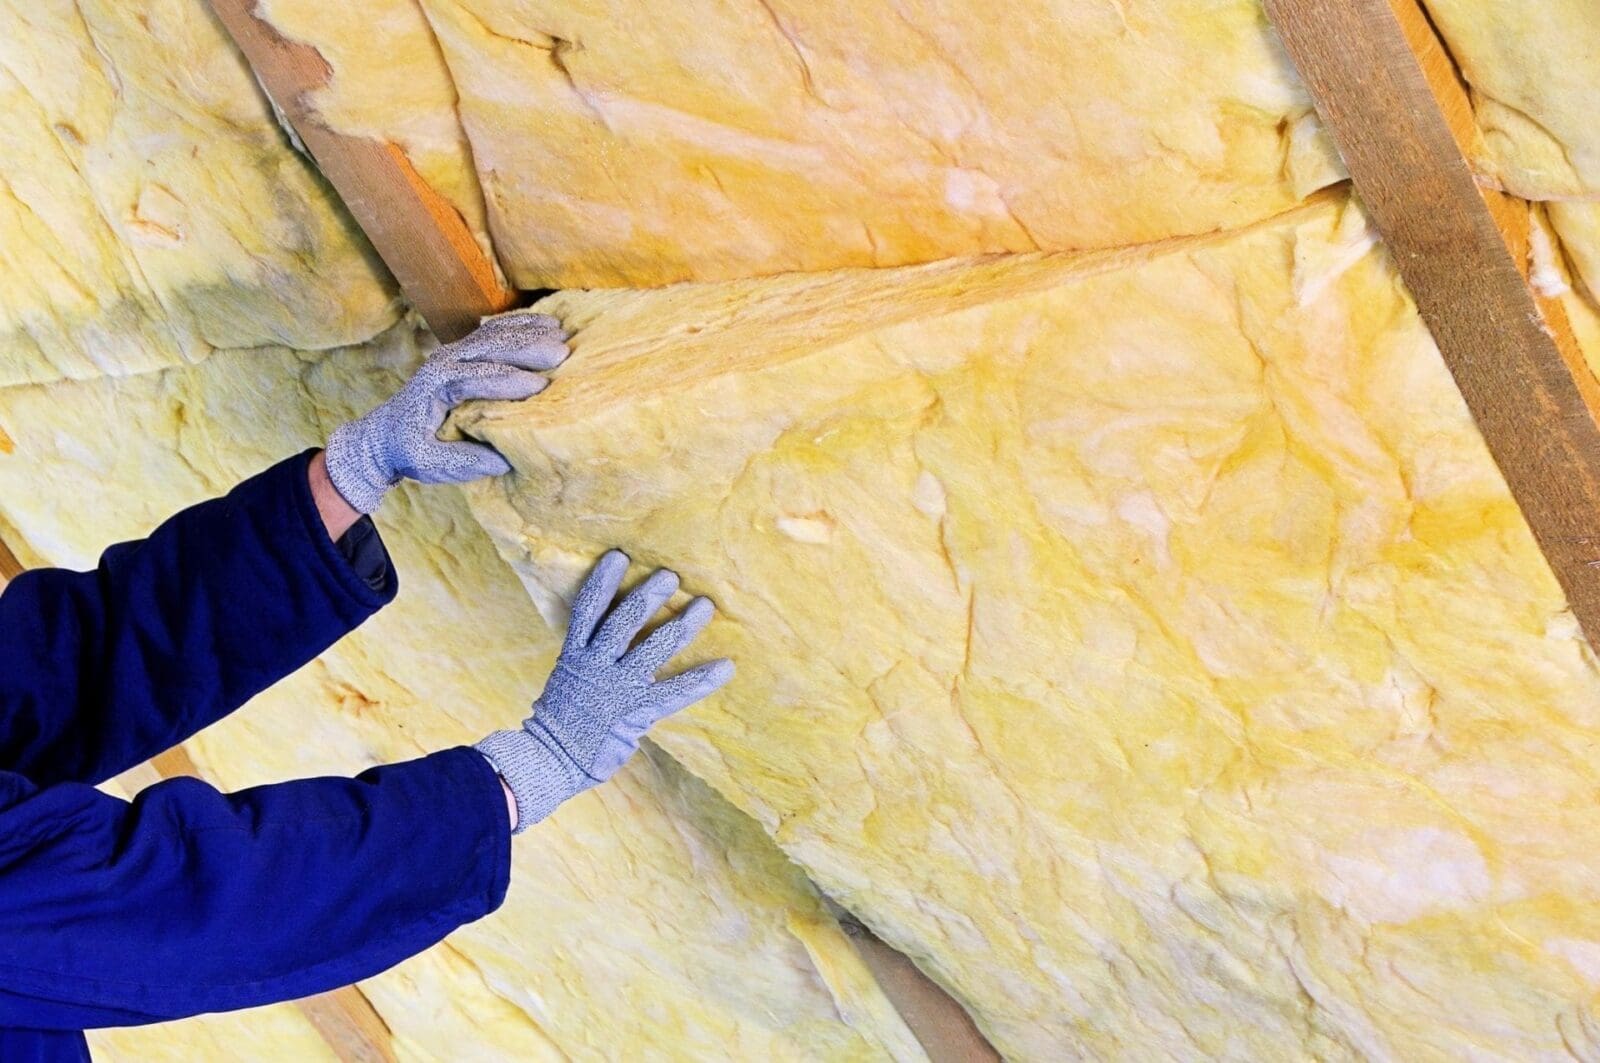 A Do It Yourself enthusiast is putting insulation on a wall.